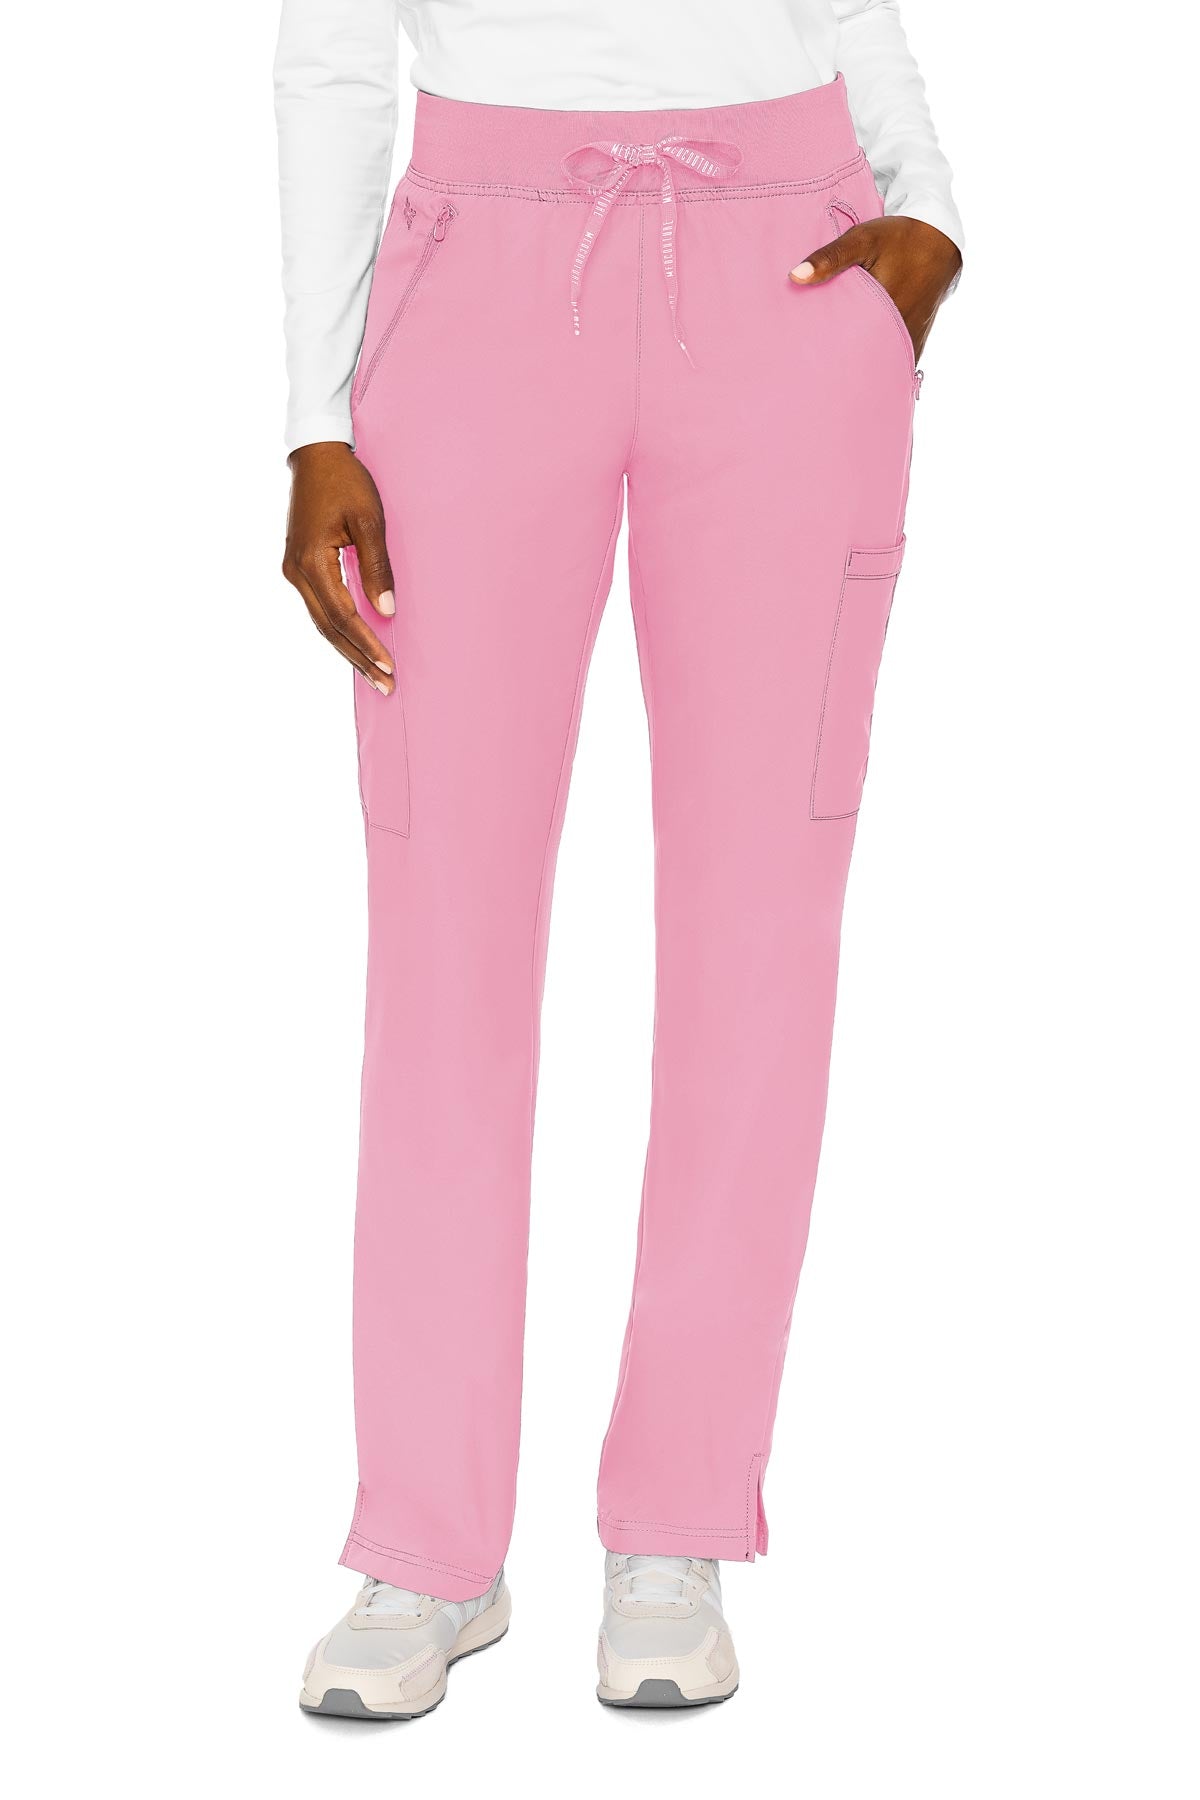 Med Couture Taffy Pink PANT